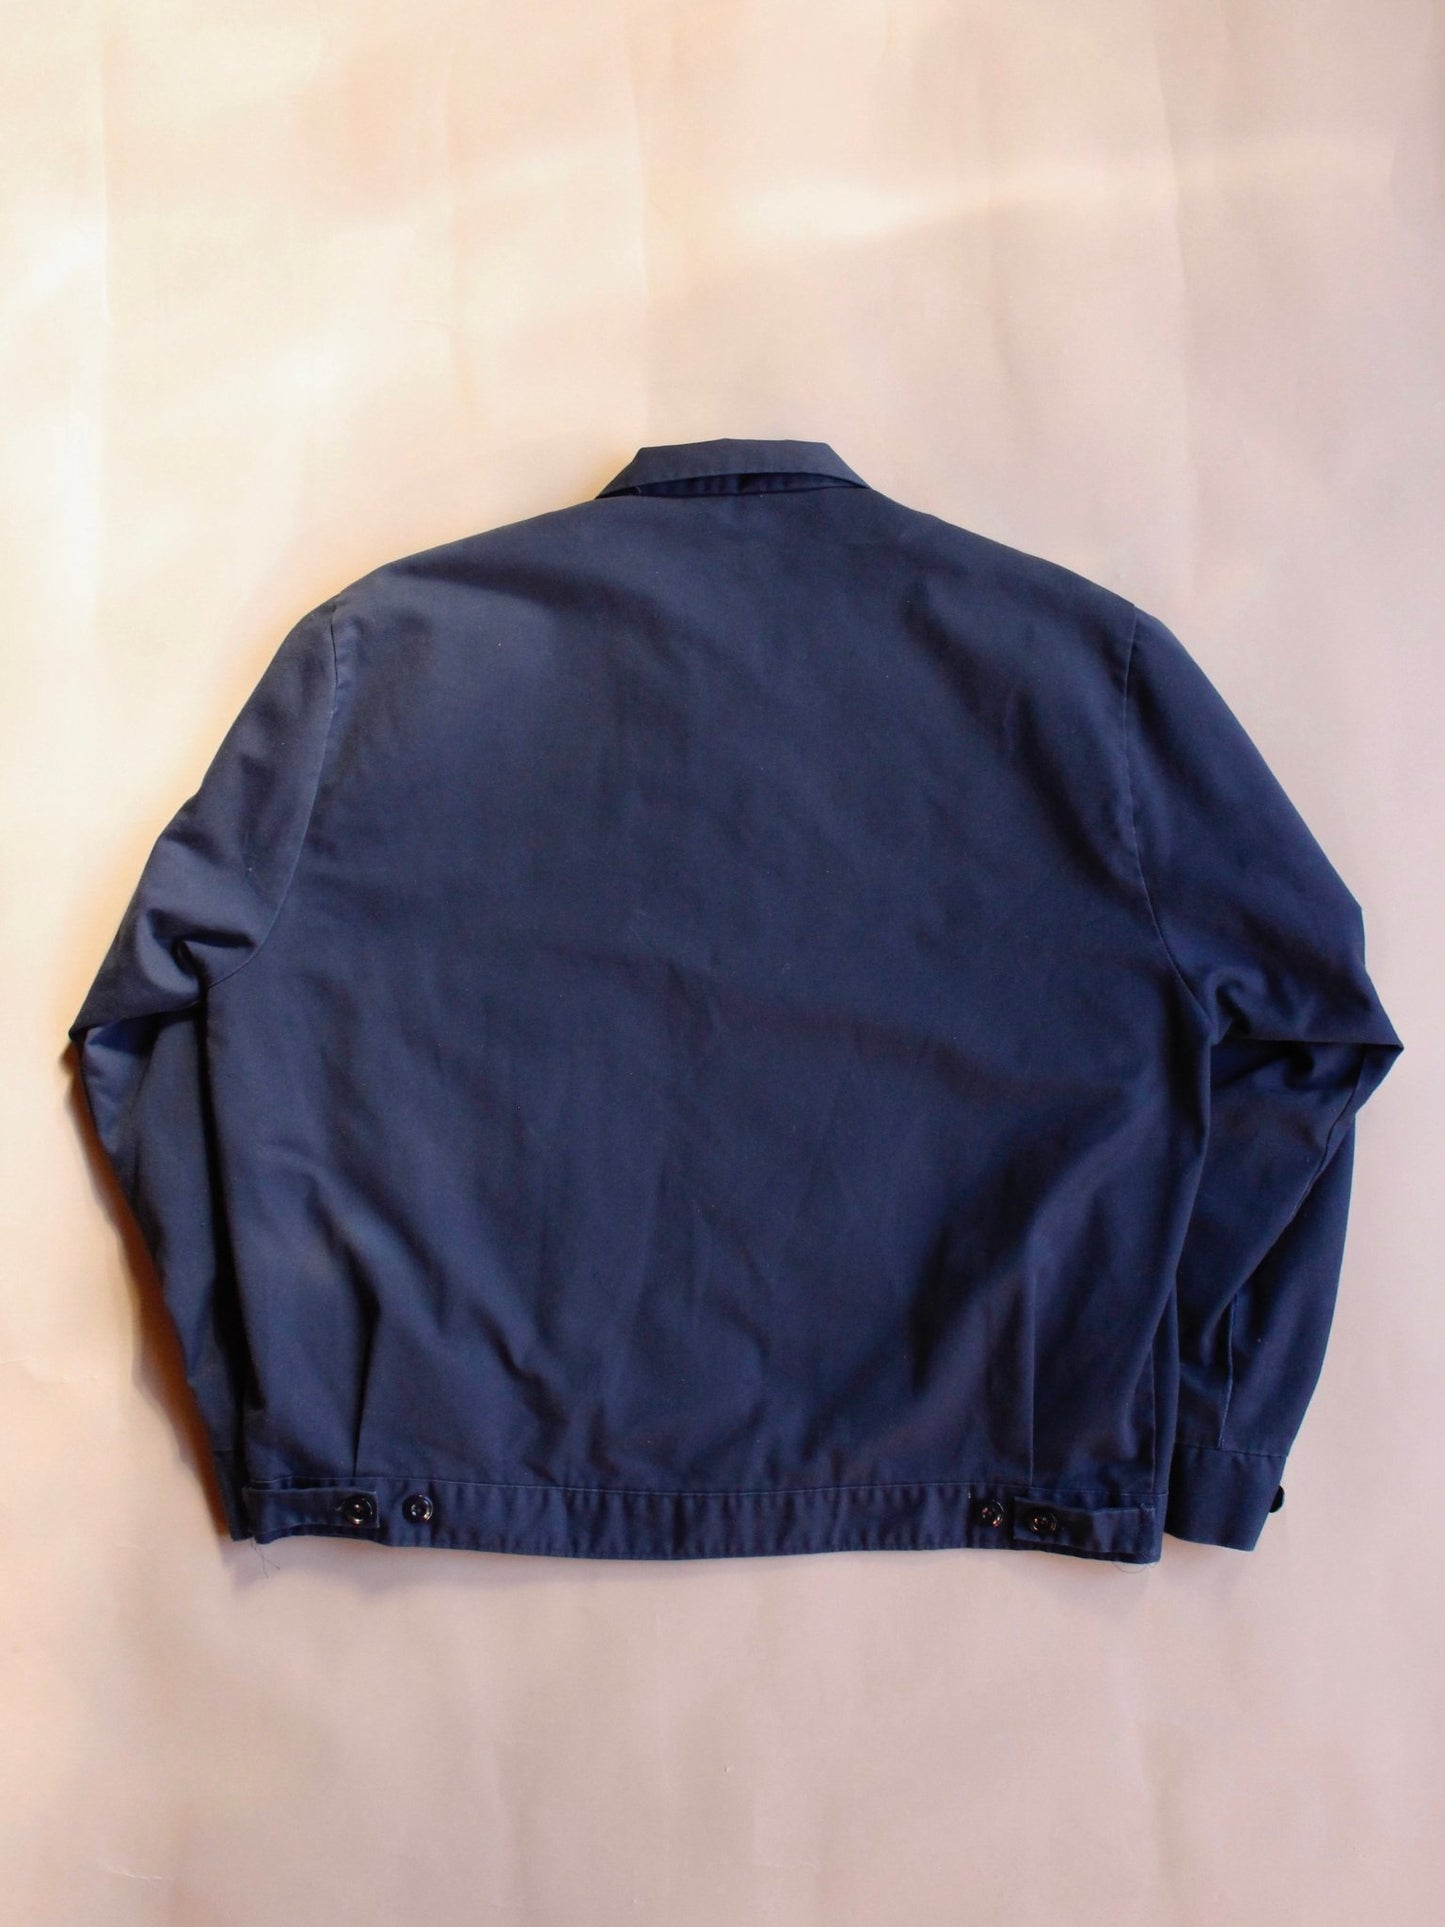 1980s Mechanics Jacket with Insulated Liner